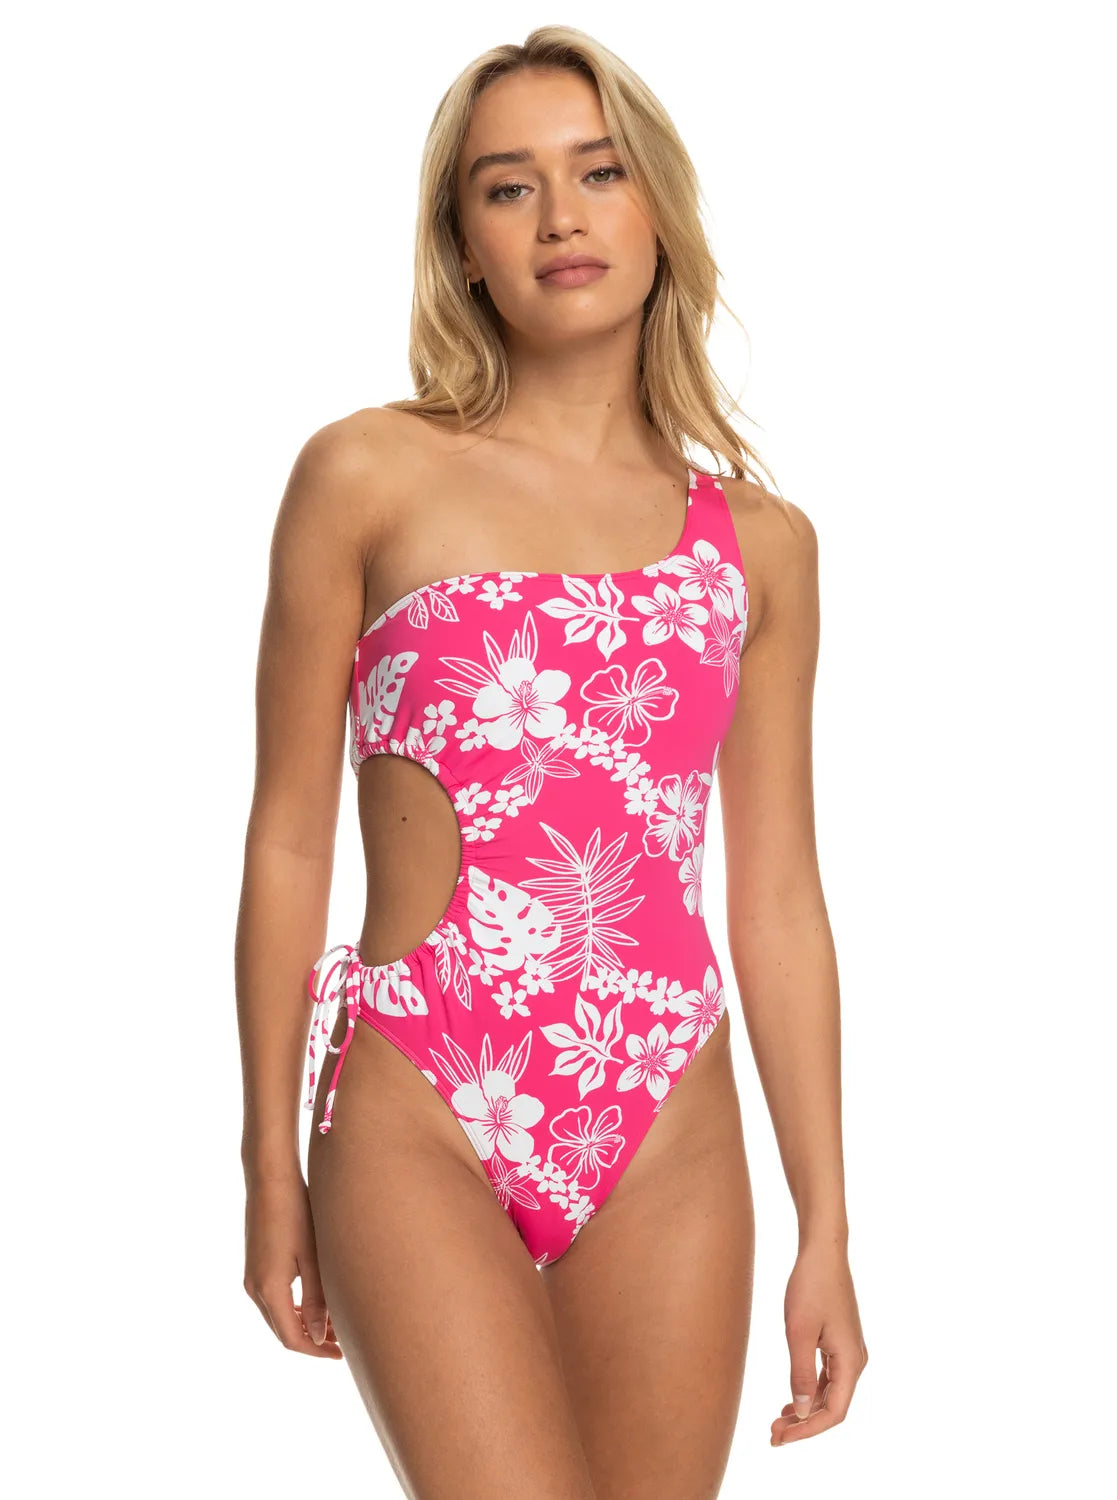 Printed Beach Classics 2021 - One-Piece Swimsuit for Women